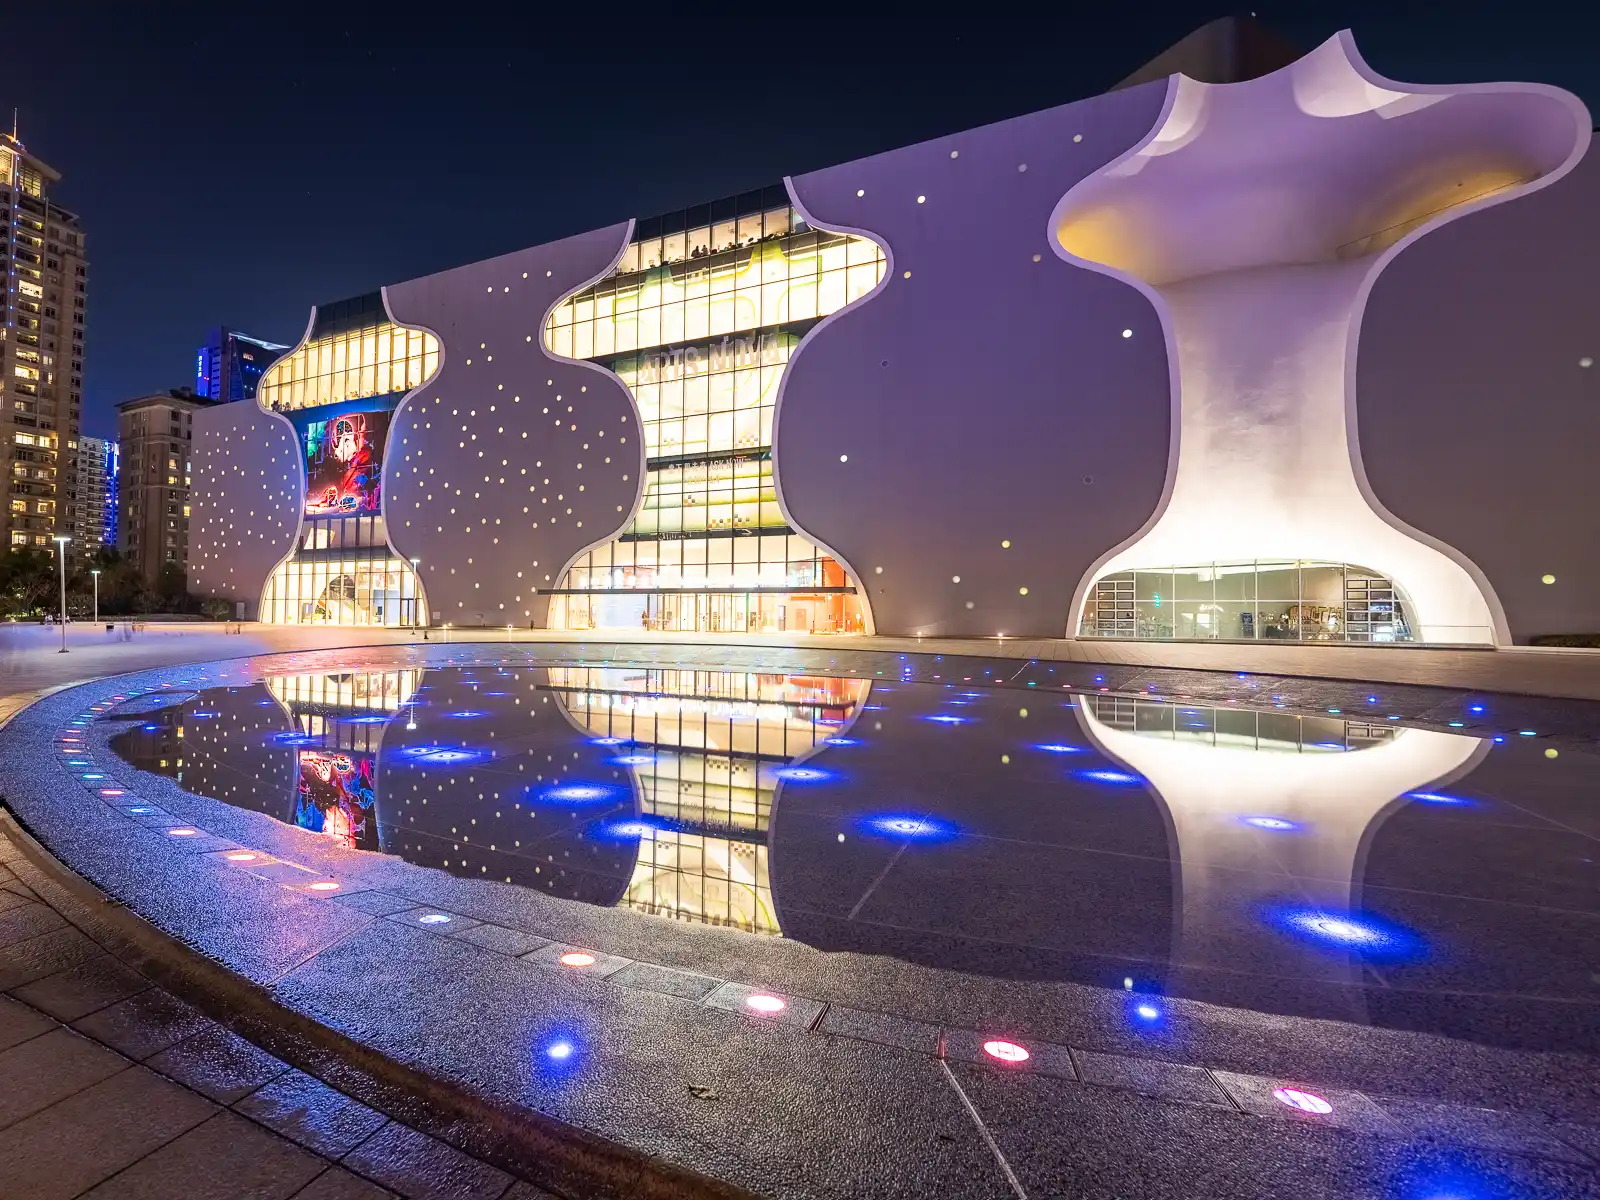 The outdoor fountain and theater are elegantly illuminated at night.